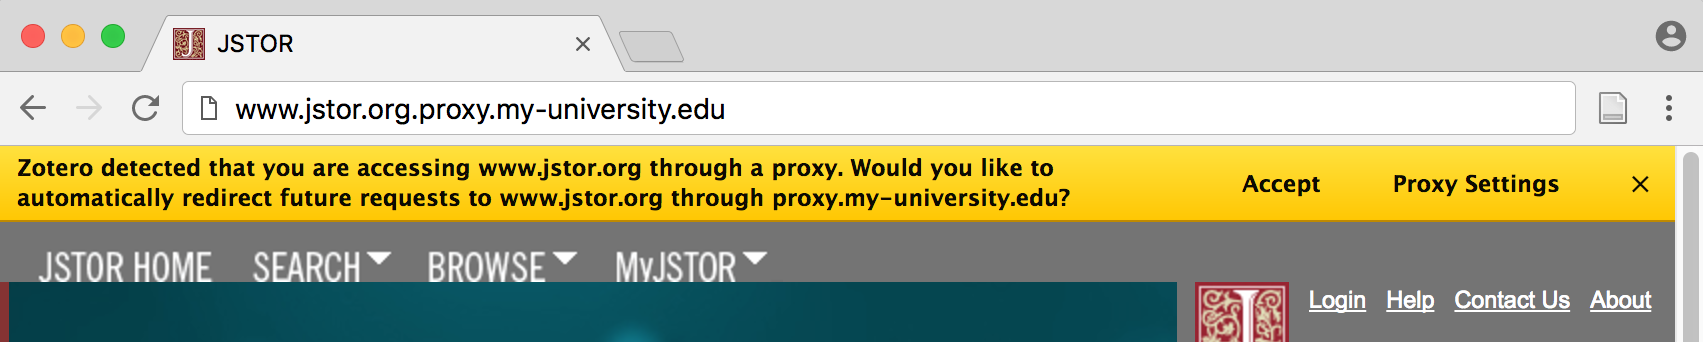 Notification bar at top of webpage: Zotero detected that you are accessing www.jstor.org through a proxy. Would you like to automatically redirect future requests to www.jstor.org through proxy.my-university.edu?